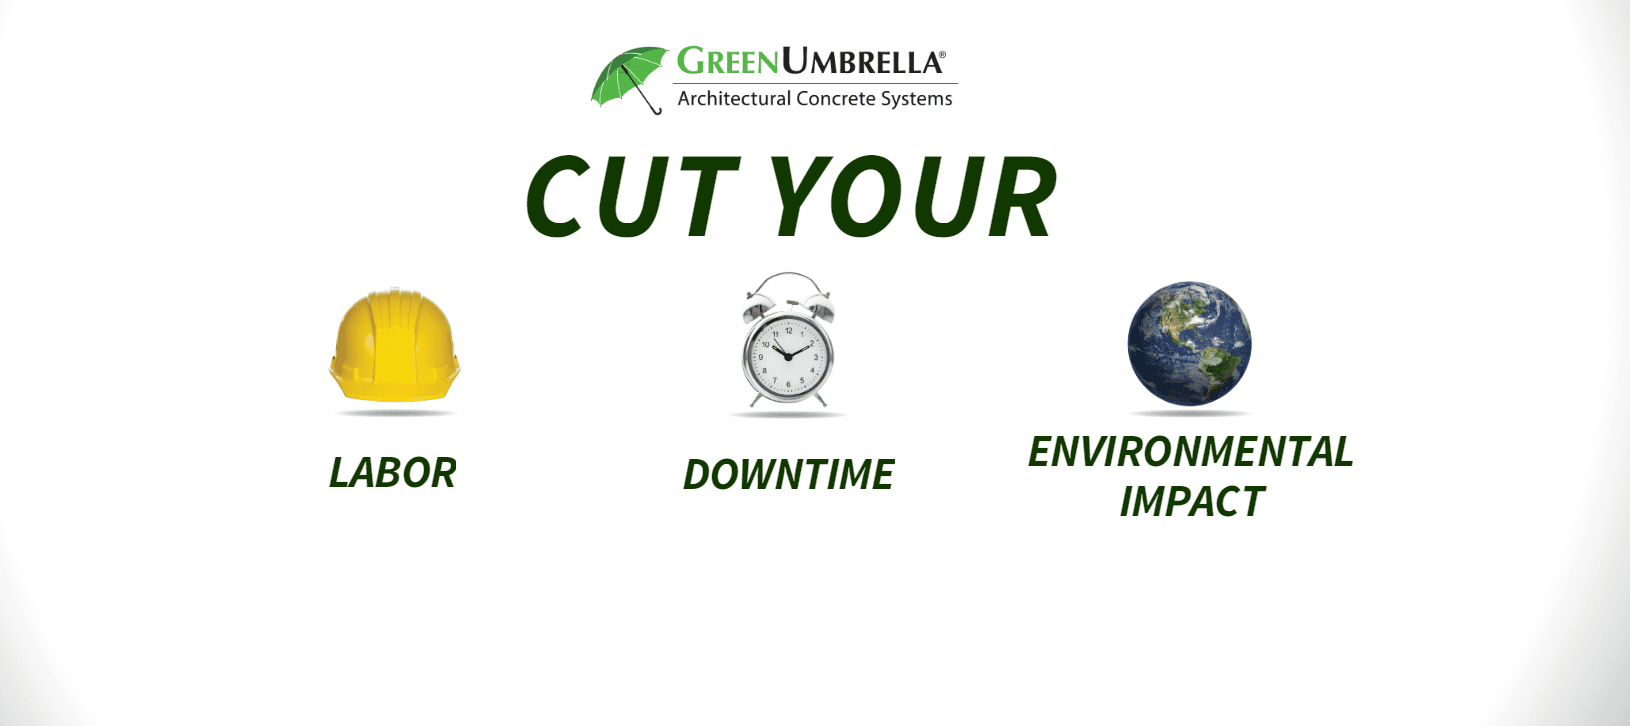 Cut Your Labor, Downtime, and Environmental Impact